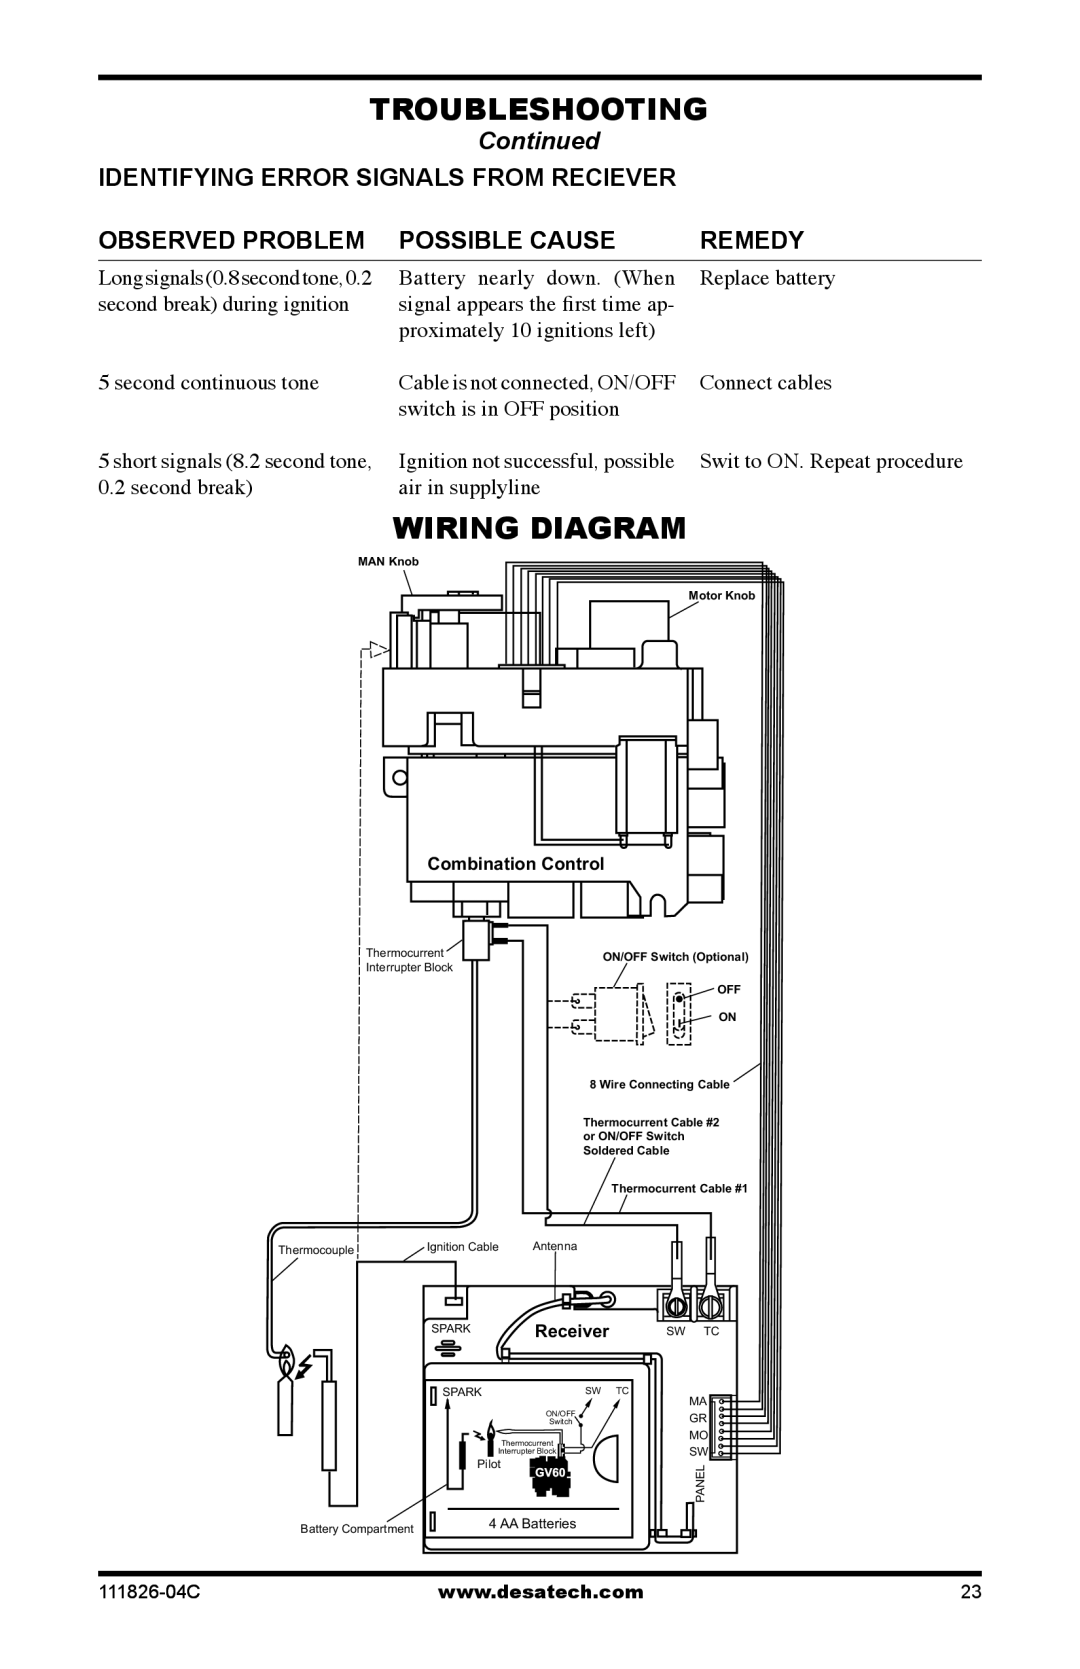 Desa VF-30P-PJD, VF-30N-PJD, VF-24N-PJD, VF-24P-PJD, VF-18N-PJD, VF-18P-PJD troubleshooting, Wiring Diagram, Continued 